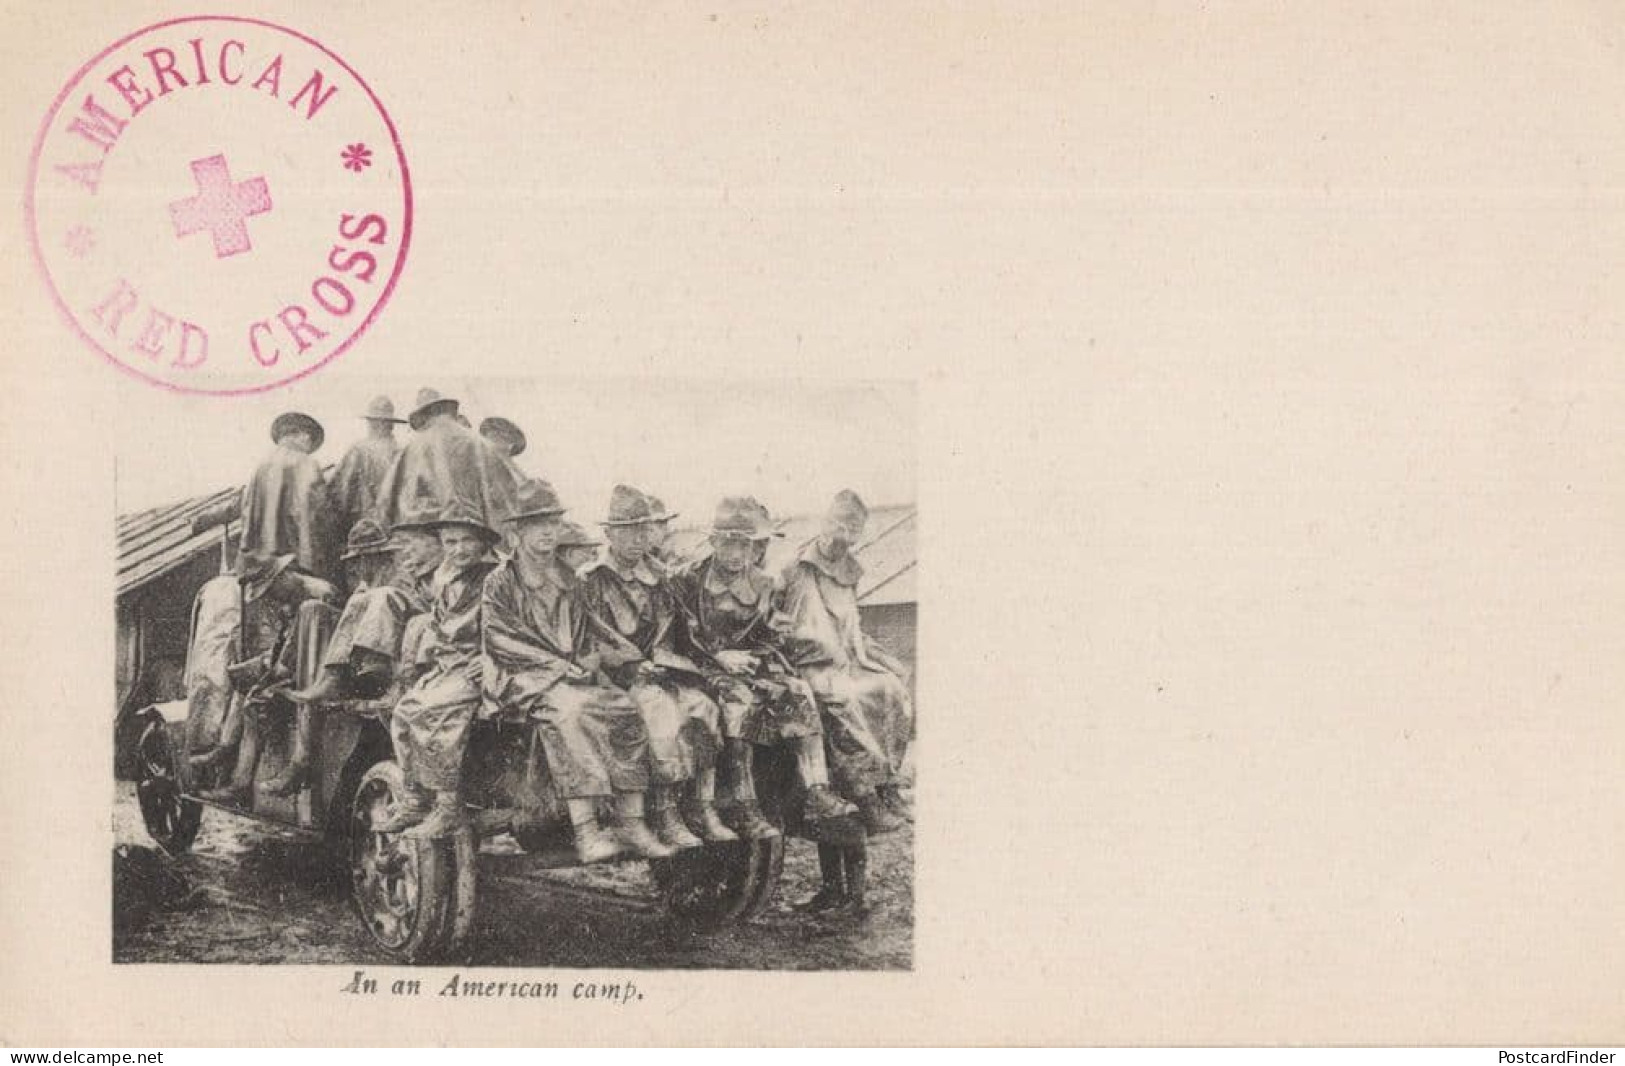 WW1 American Red Cross Soldiers In Camp France WW1 Postcard - Croix-Rouge